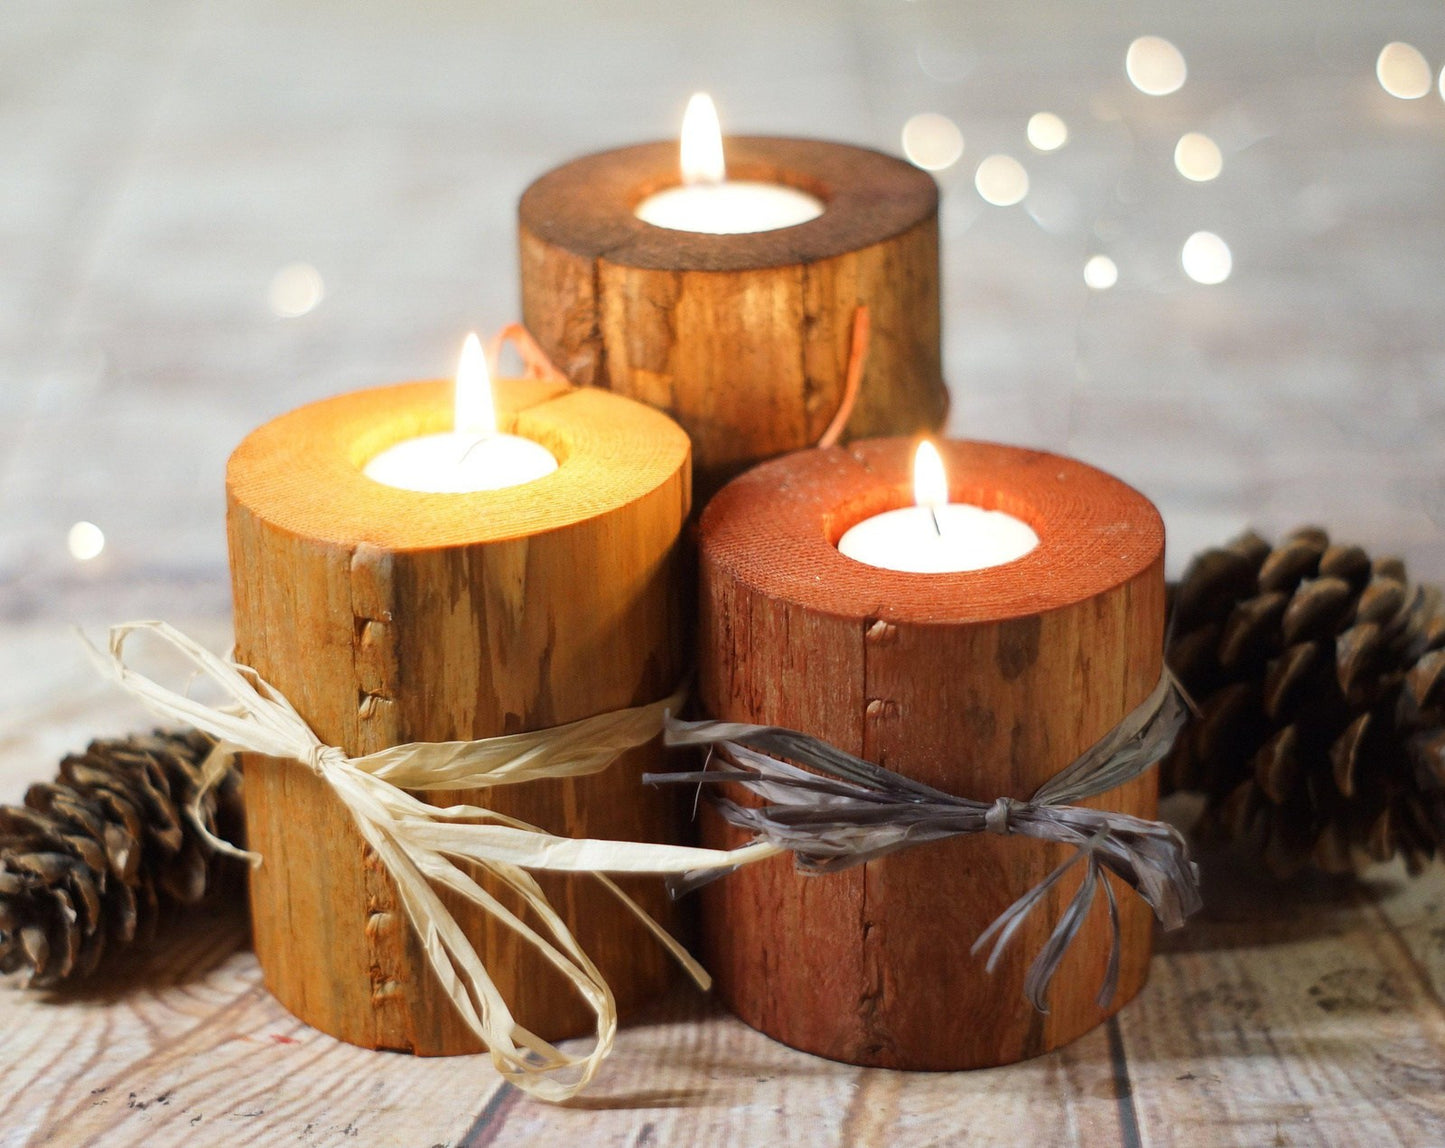 Log Candles, Harvest Colors, Fall Decor-Candle Holders-GFT Woodcraft